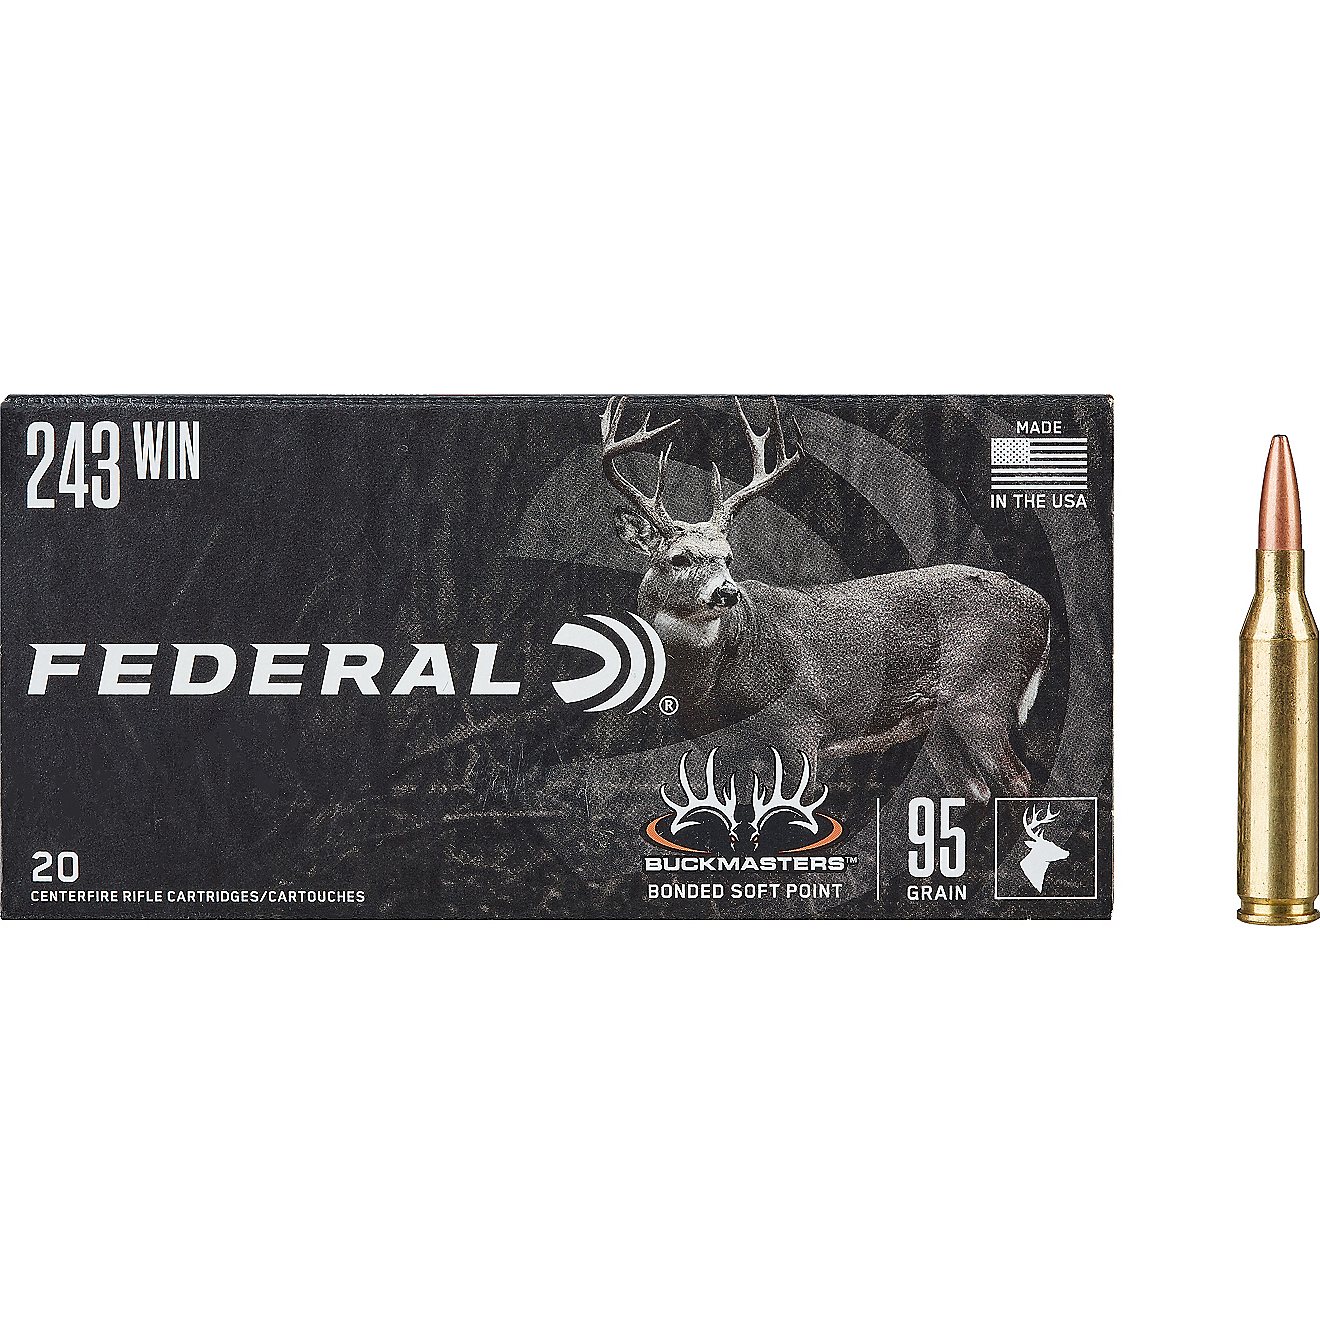 Federal Premium Buckmasters Bonded Soft Point .243 Winchester 95-Grain Centerfire Rifle Ammunition - 20 Rounds                   - view number 1